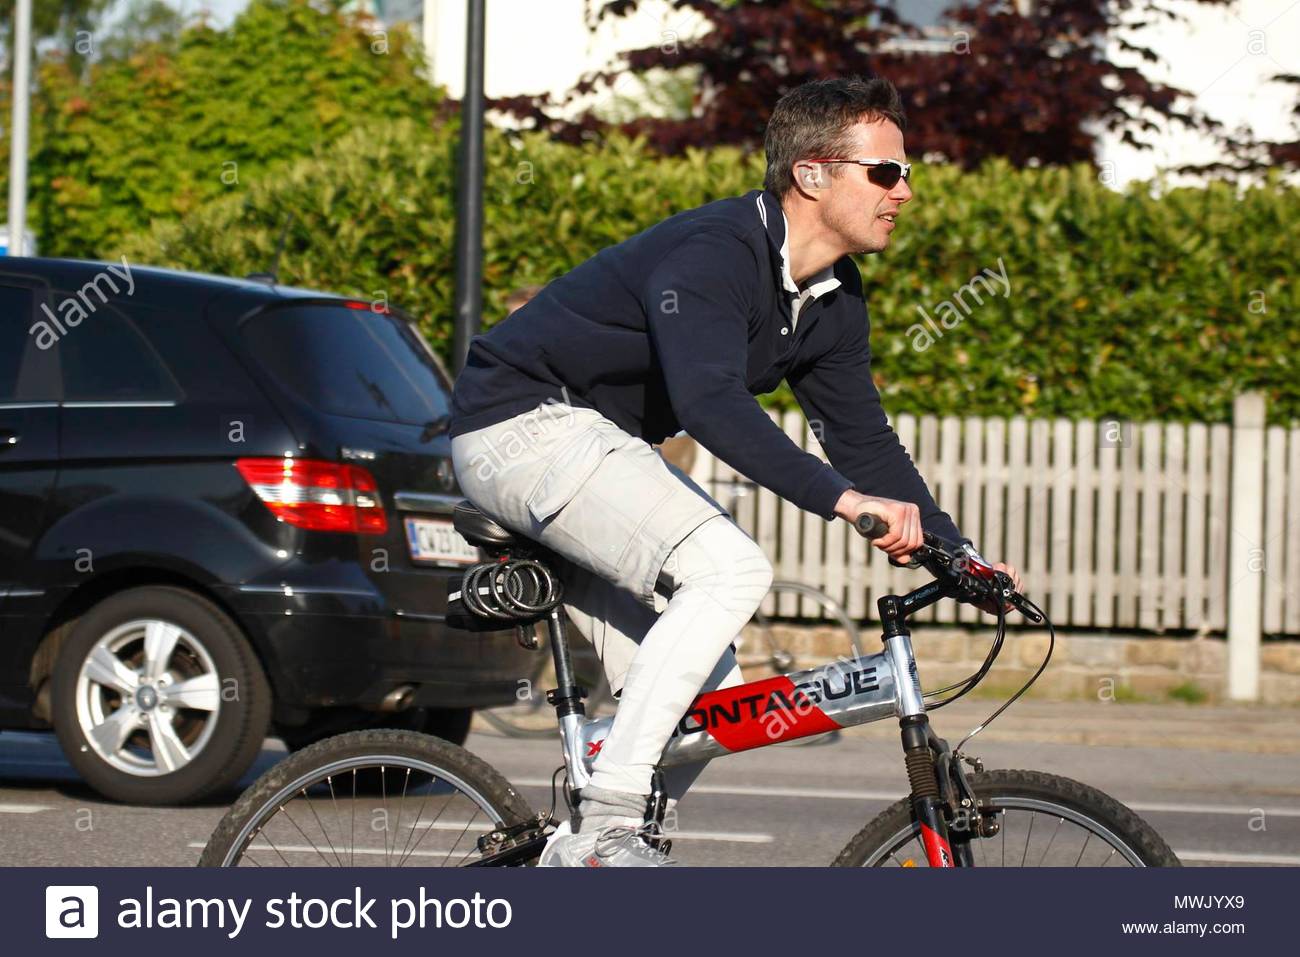 crown-prince-frederik-exclusive-no-fancy-cars-or-drivers-for-the-crown-prince-crown-prince-frederik-were-riding-the-bike-down-to-hellerup-harbour-to-attend-the-danish-championship-in-drage-sailing-may-19-2012-code-03504obj-photo-ole-bjoerkall-over-press-denmark-MWJYX9.jpg